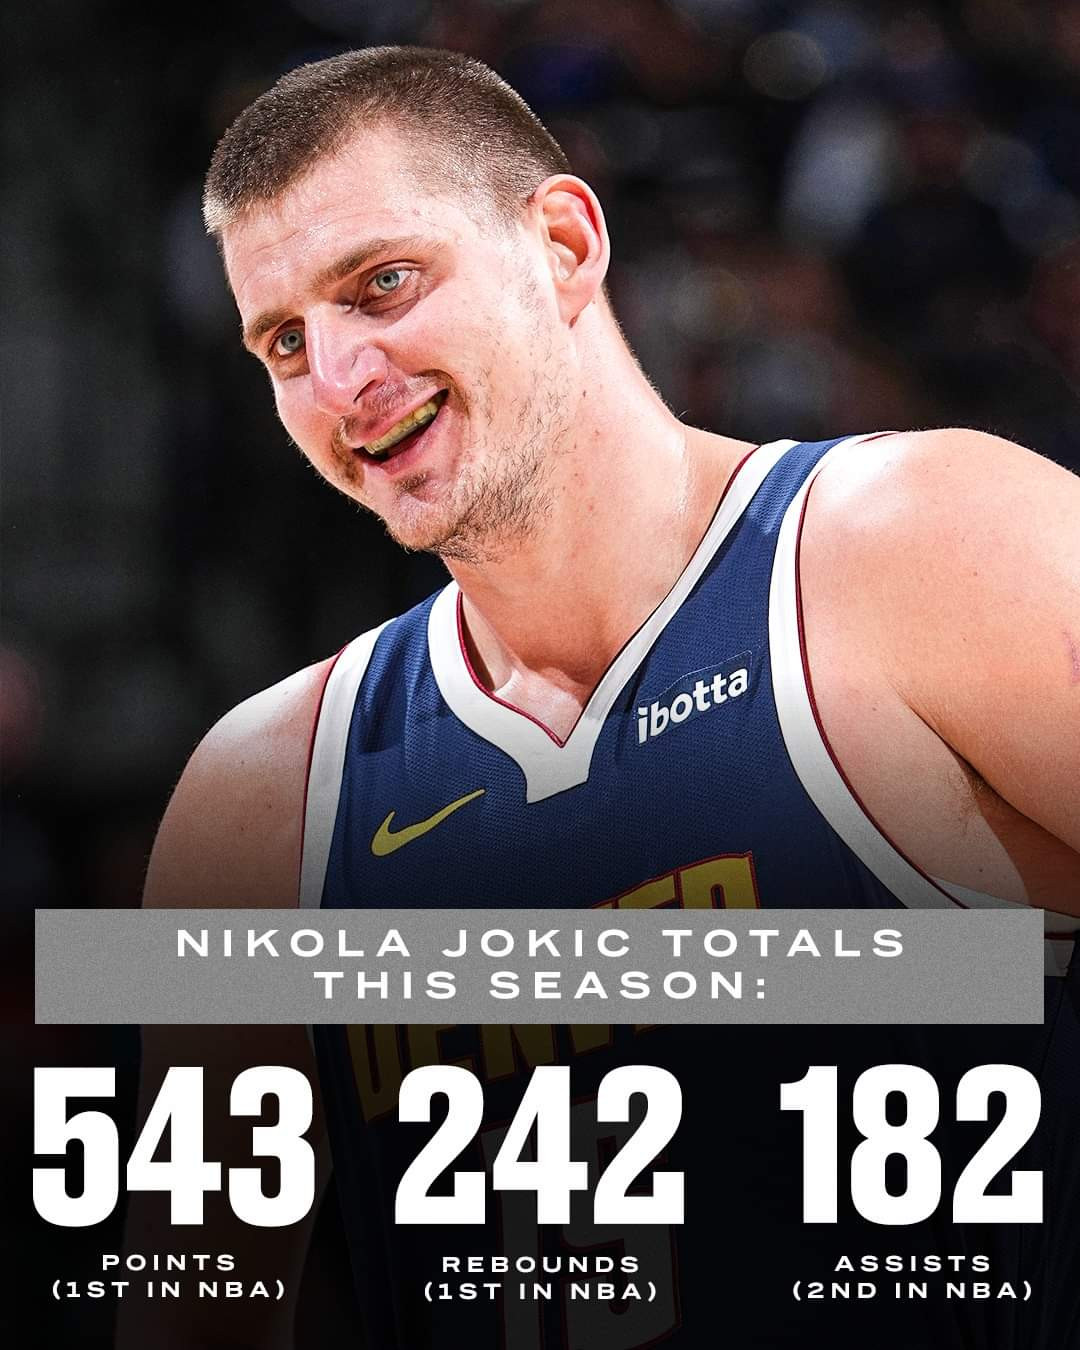 Nicola Jokic Currently Leads NBA Total Points